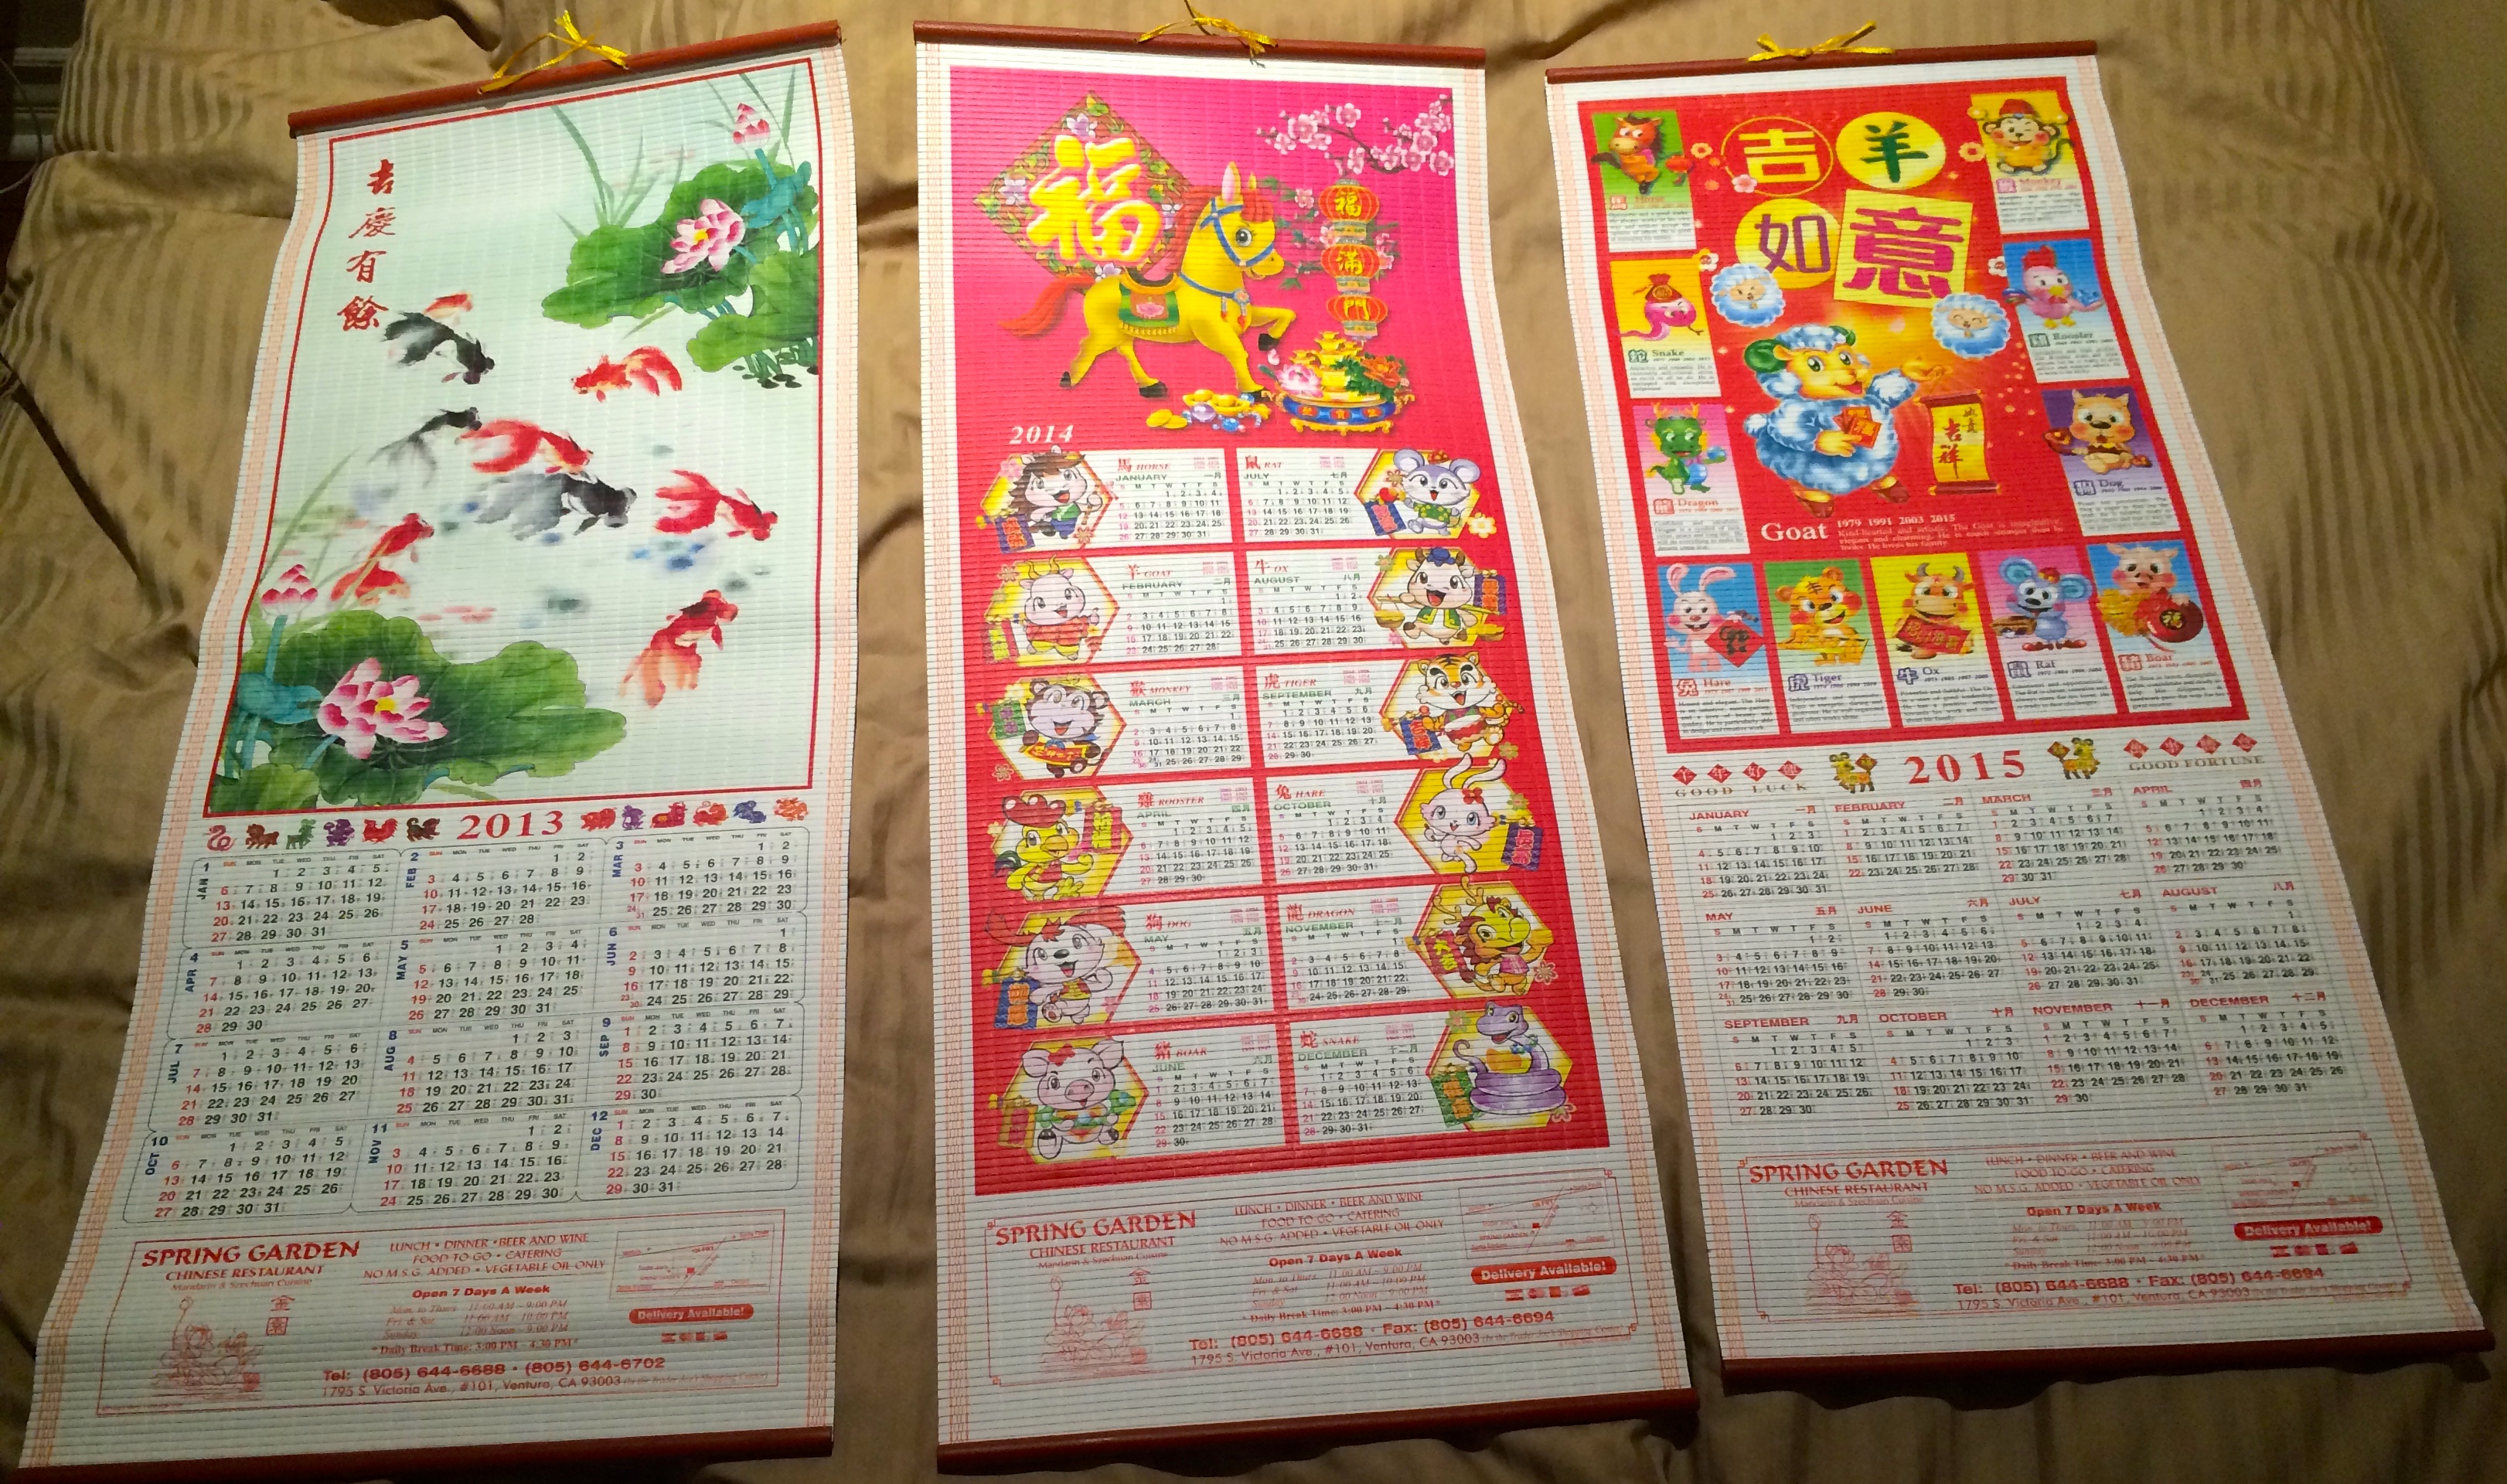 Chinese Calendar – Cultural Object | Jake Rice - Visual Journal of Asian Culture3243 x 1920